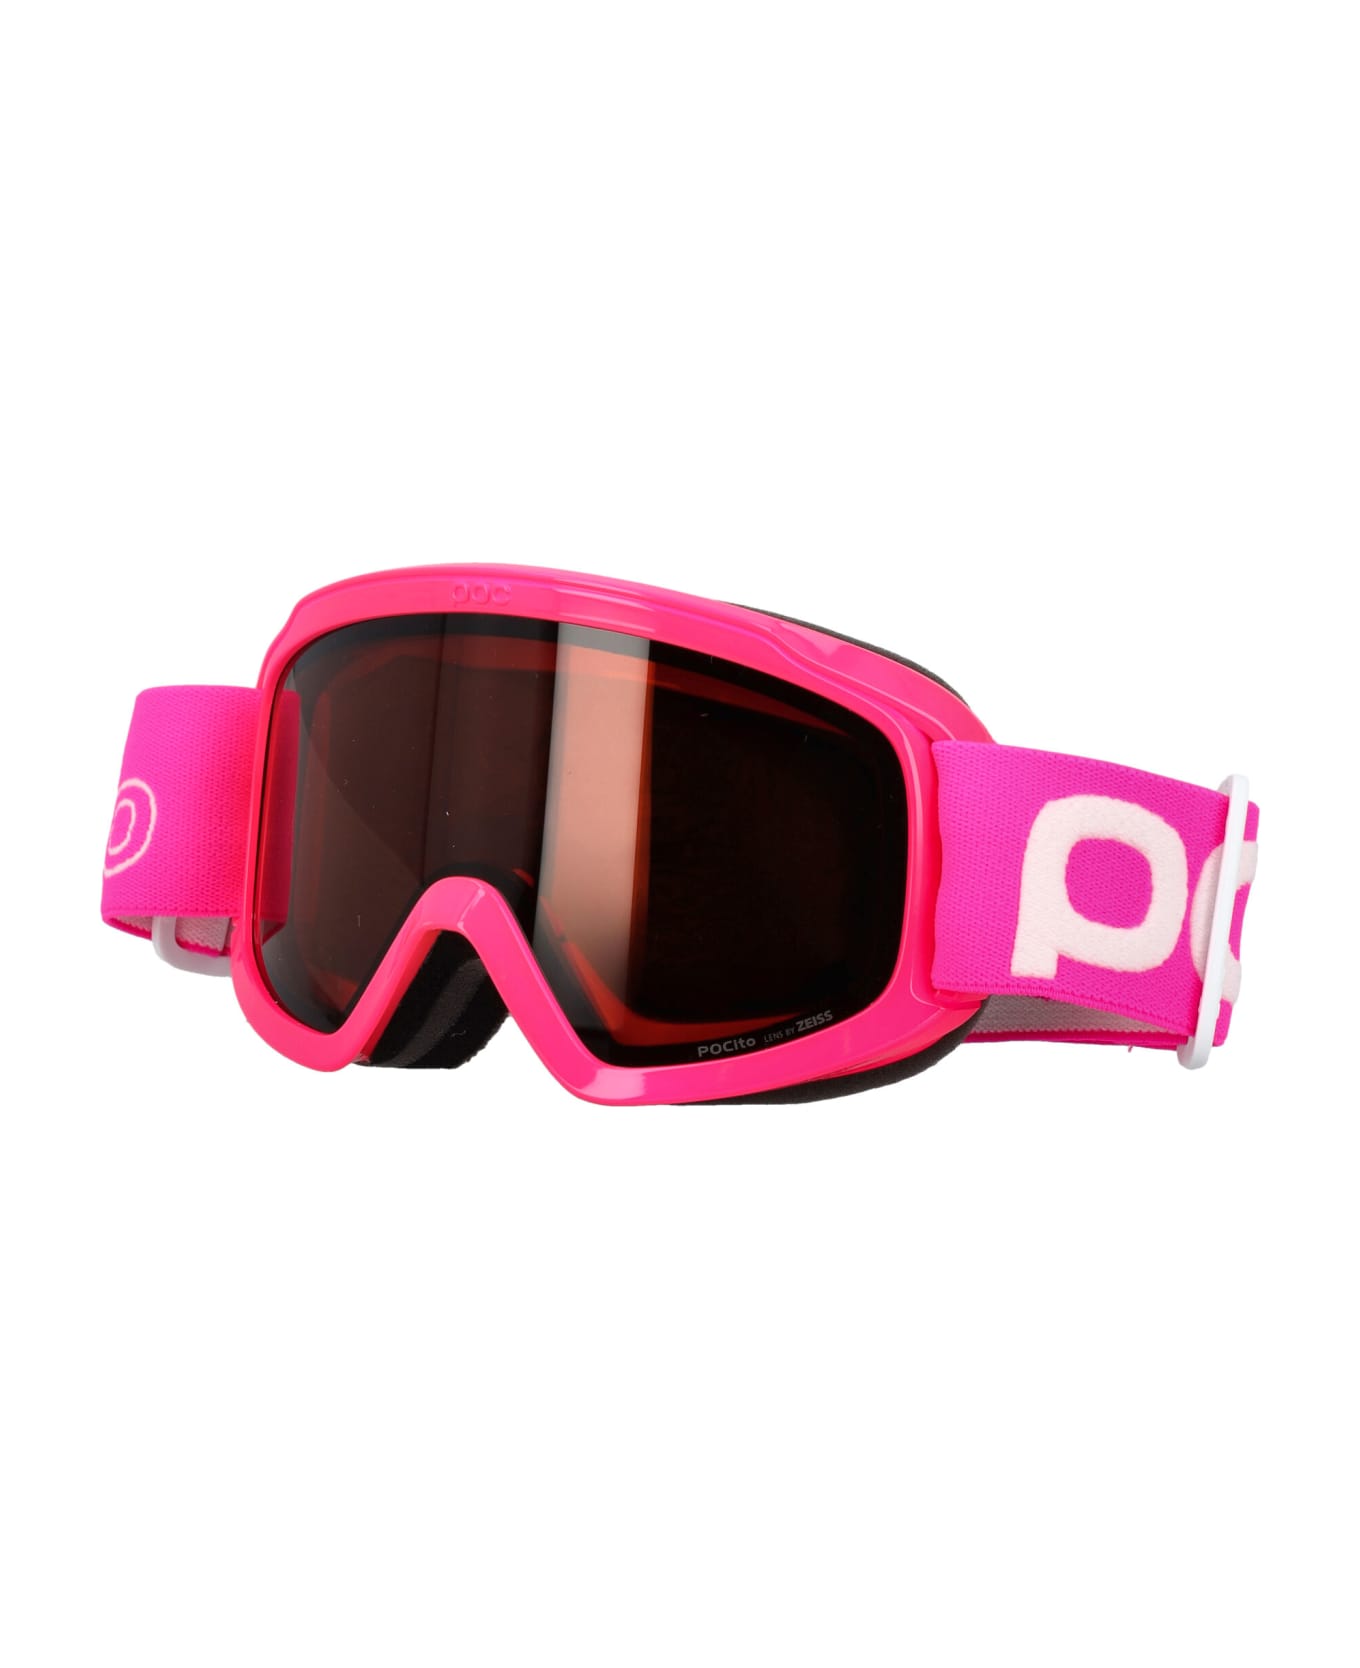 Poc ito Opsin - FLUORESCENT PINK